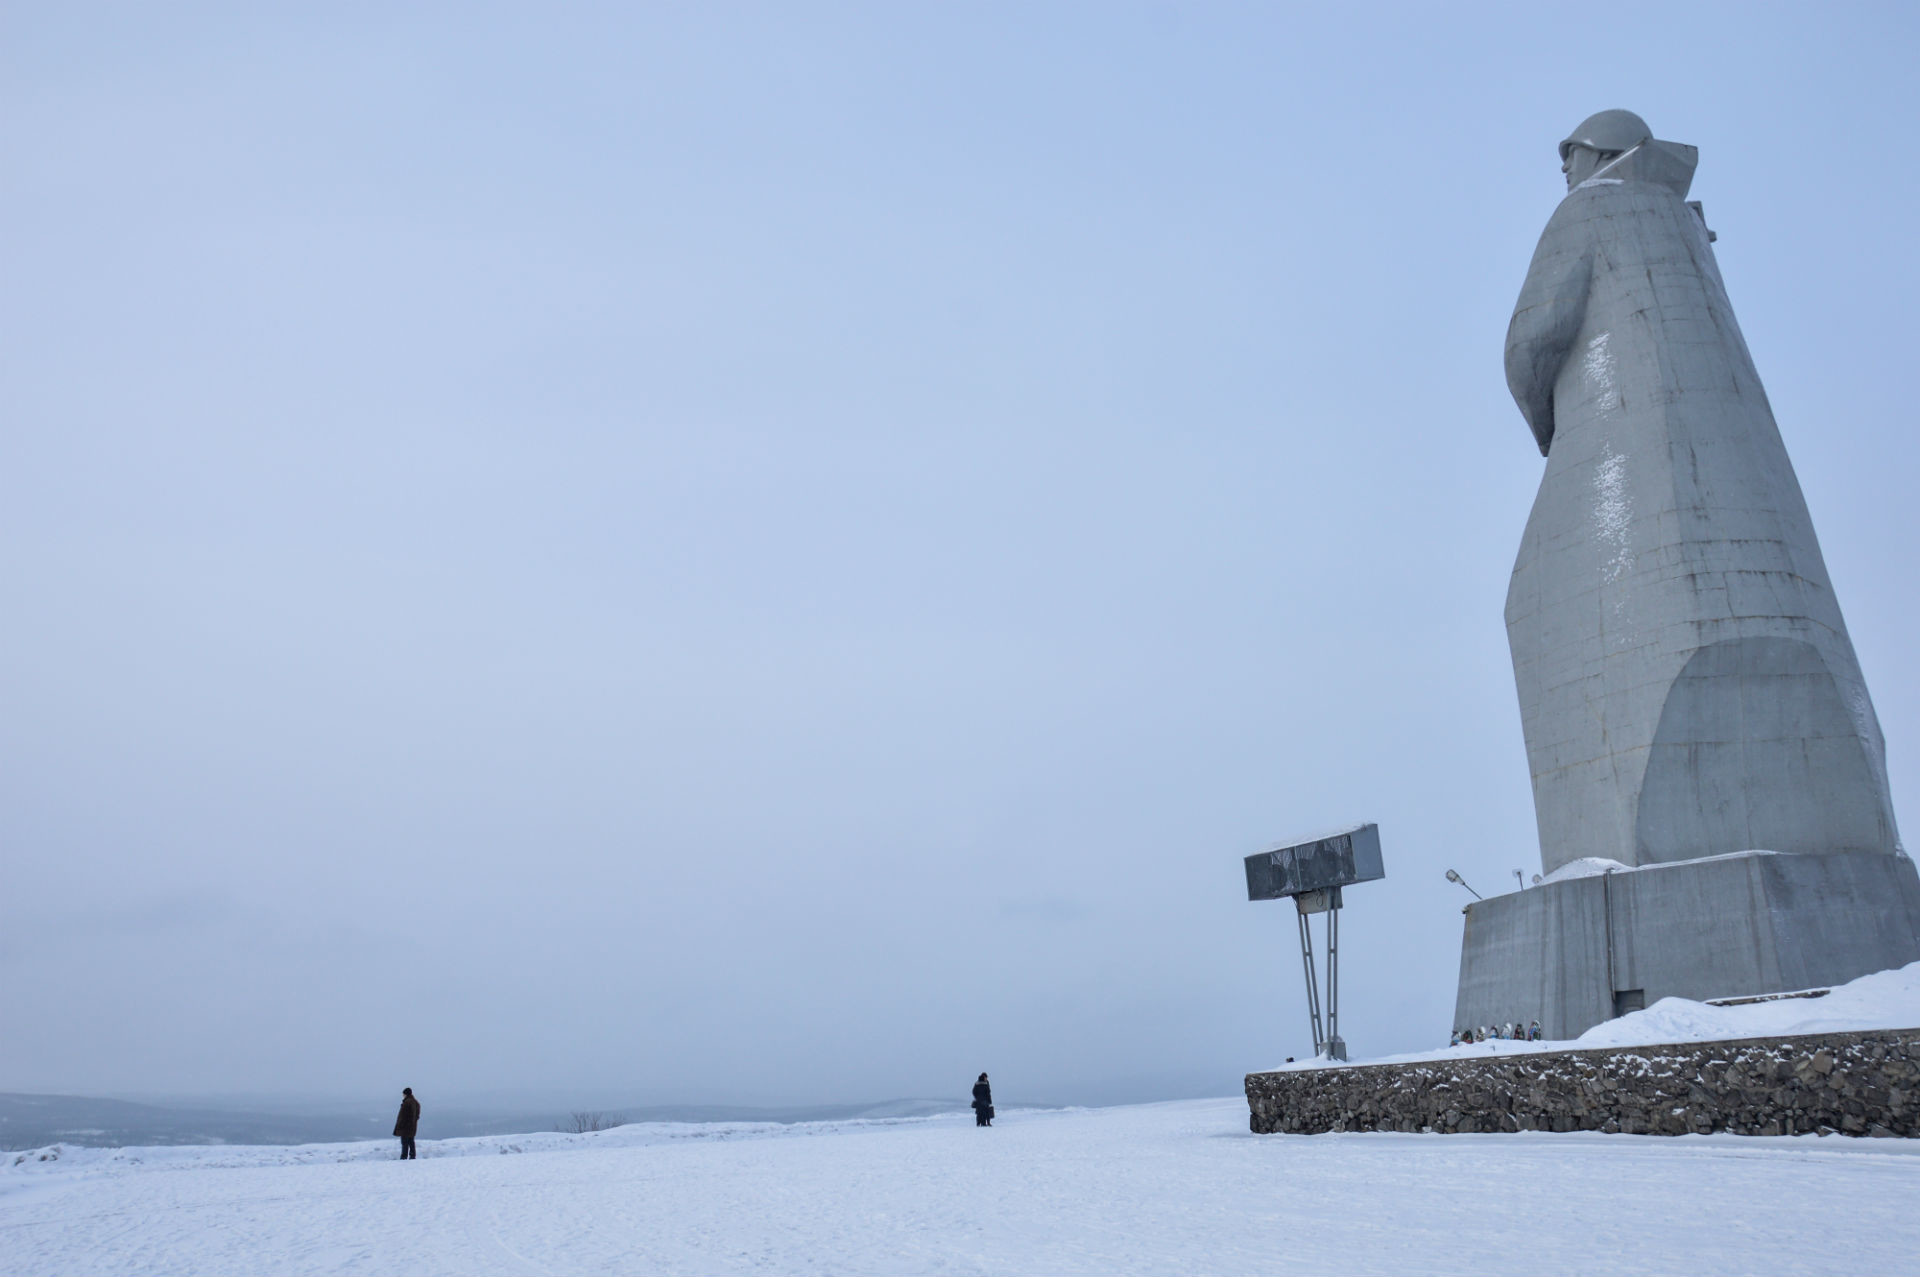 If you feel dwarfed by this statue’s size, trust me, it’s nothing compared to the huge Kola Peninsula. 